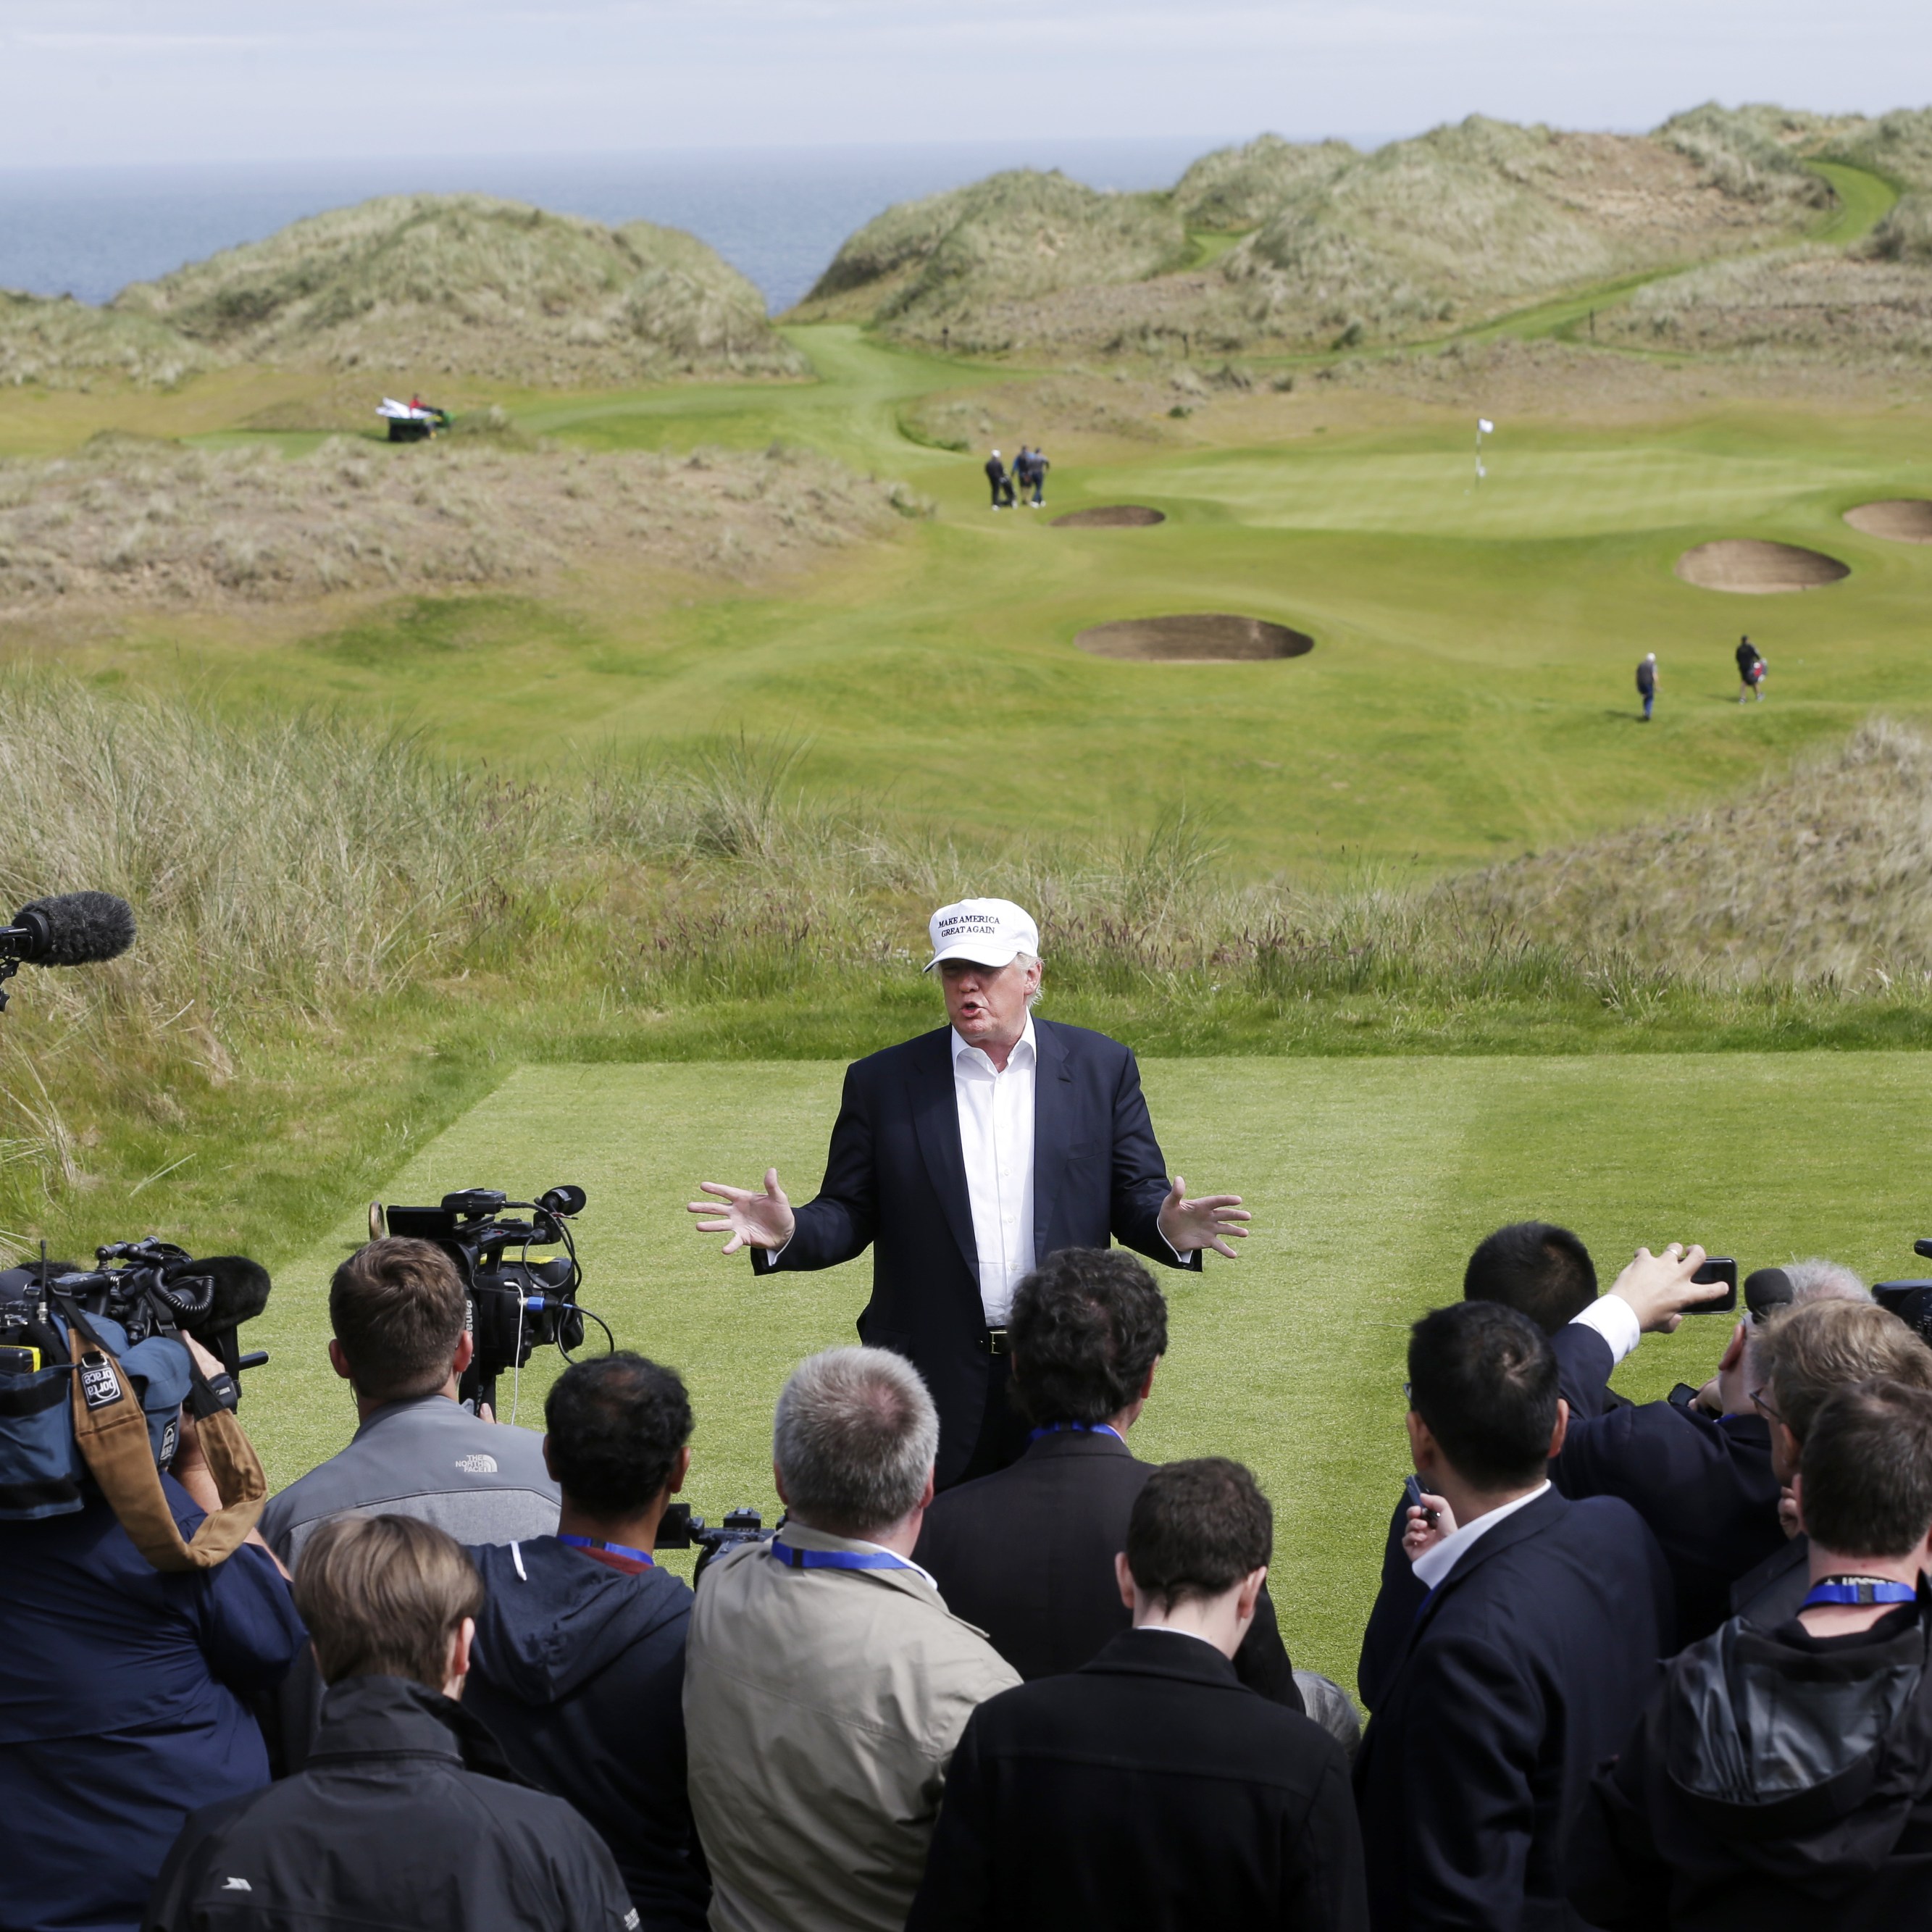 Donald Trump at the Trump International Golf Links in Aberdeen in June 2016, a few months before he was elected president of the US